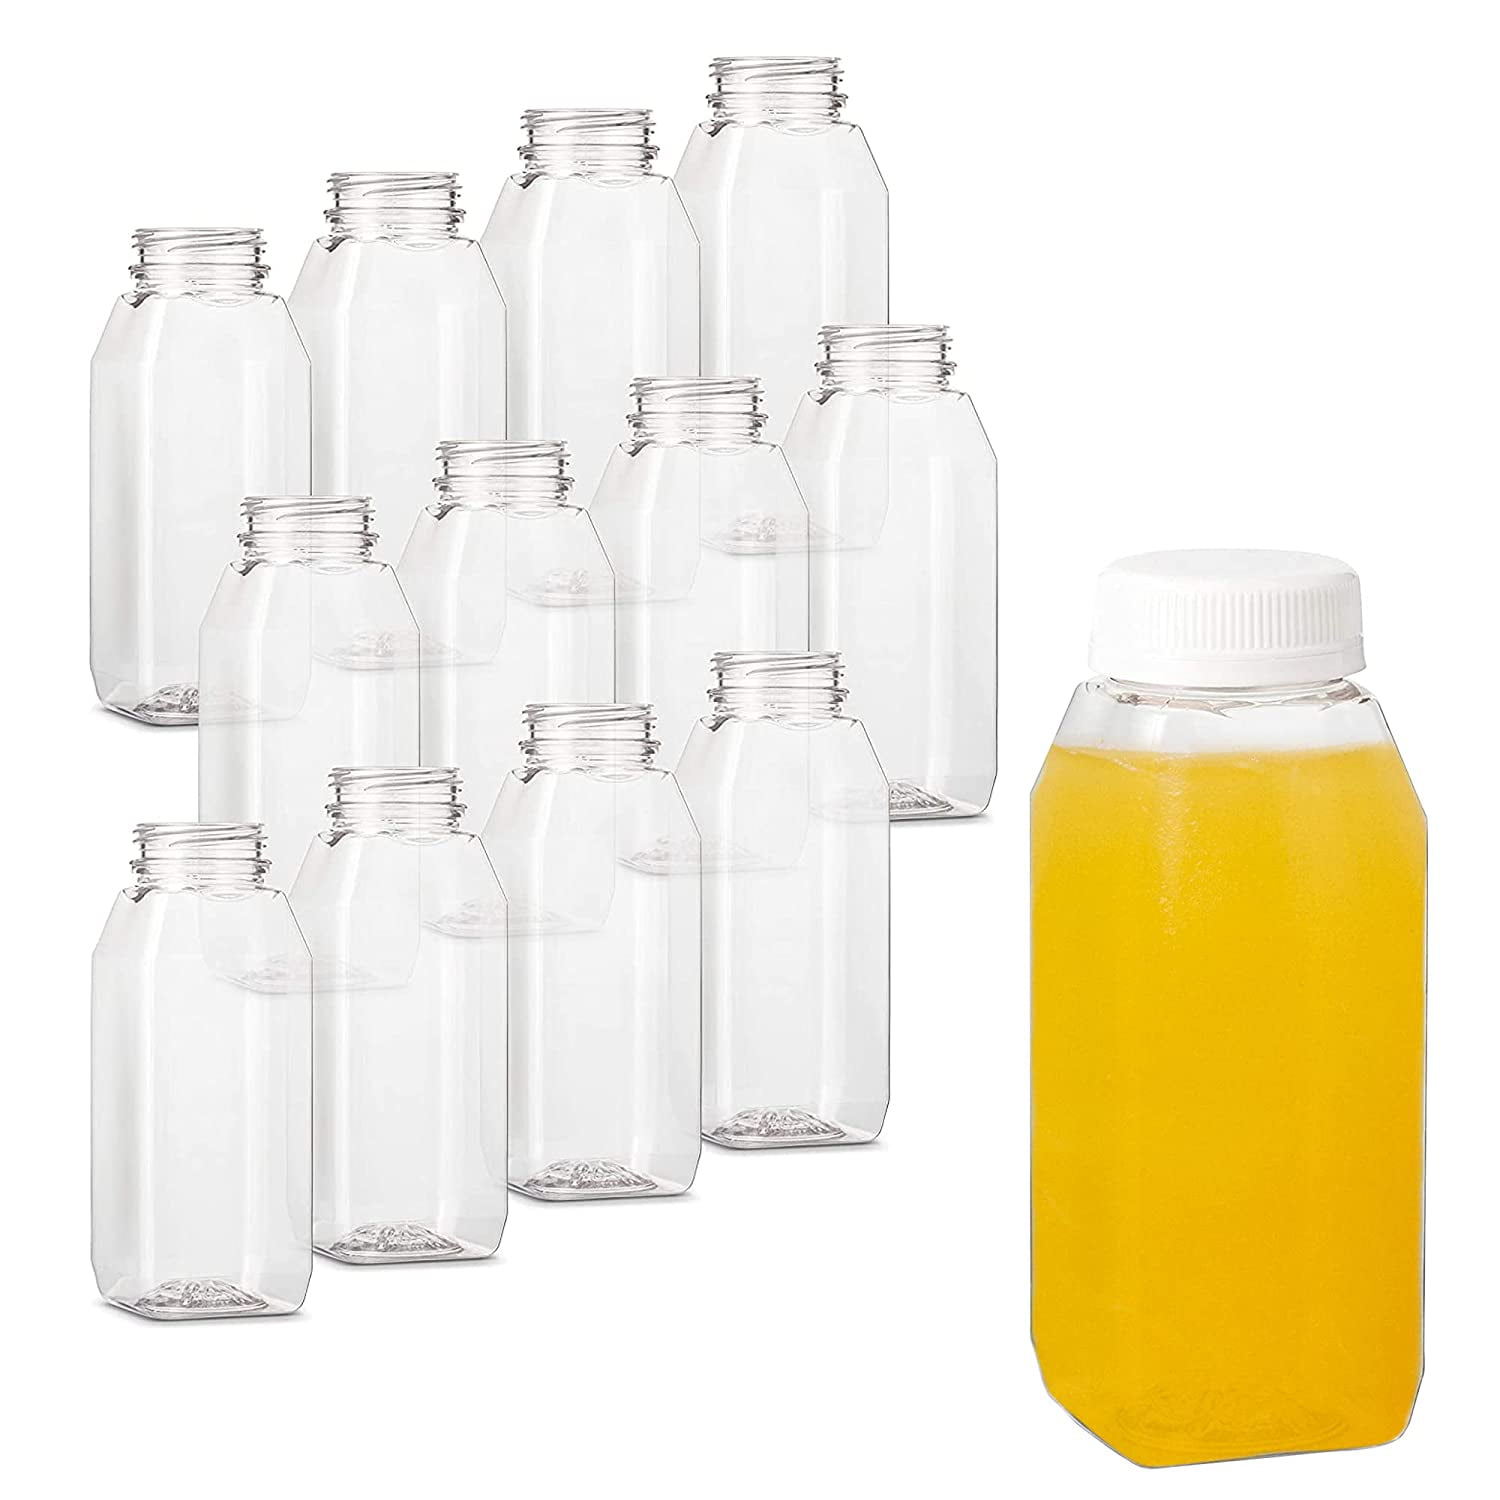 20 Pack] Empty Clear Plastic Juice Bottles with Tamper Evident Caps 32 OZ  Quart Bottles - Smoothie Bottles - Ideal for Juices, Milk, Smoothies, Juice  Containers and even Meal Prep by EcoQuality 